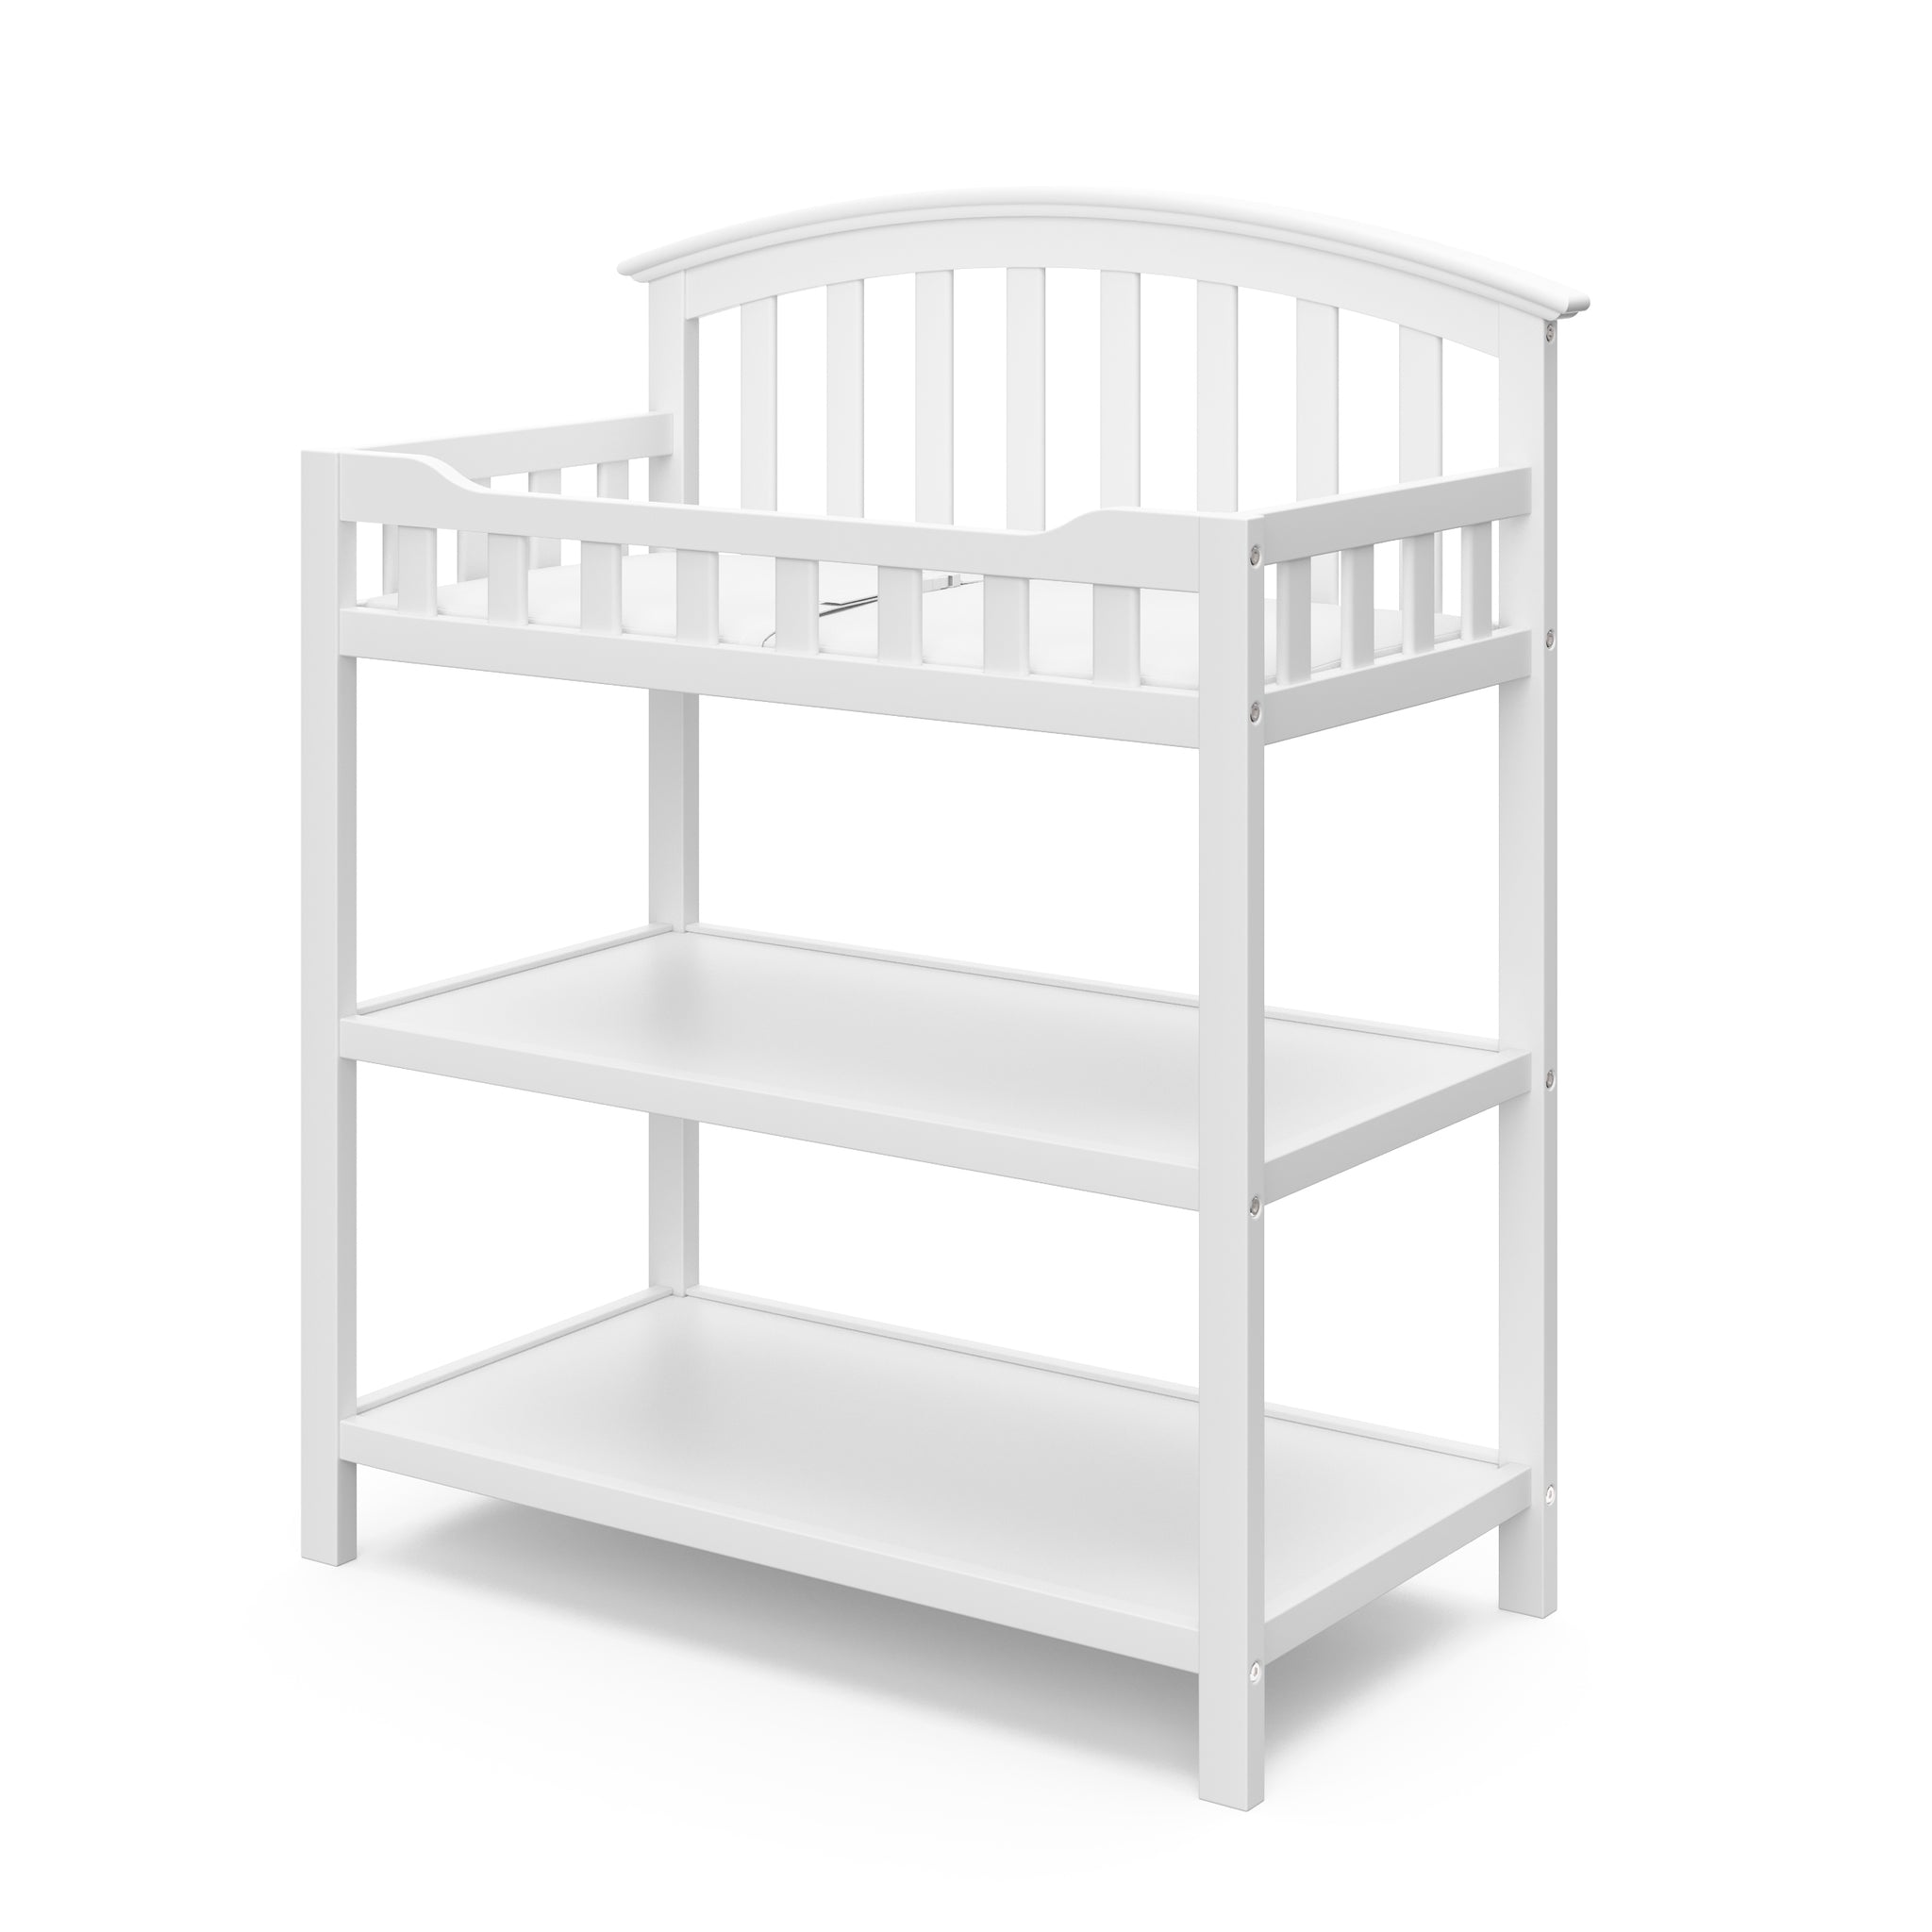 White angled changing table with two open shelves